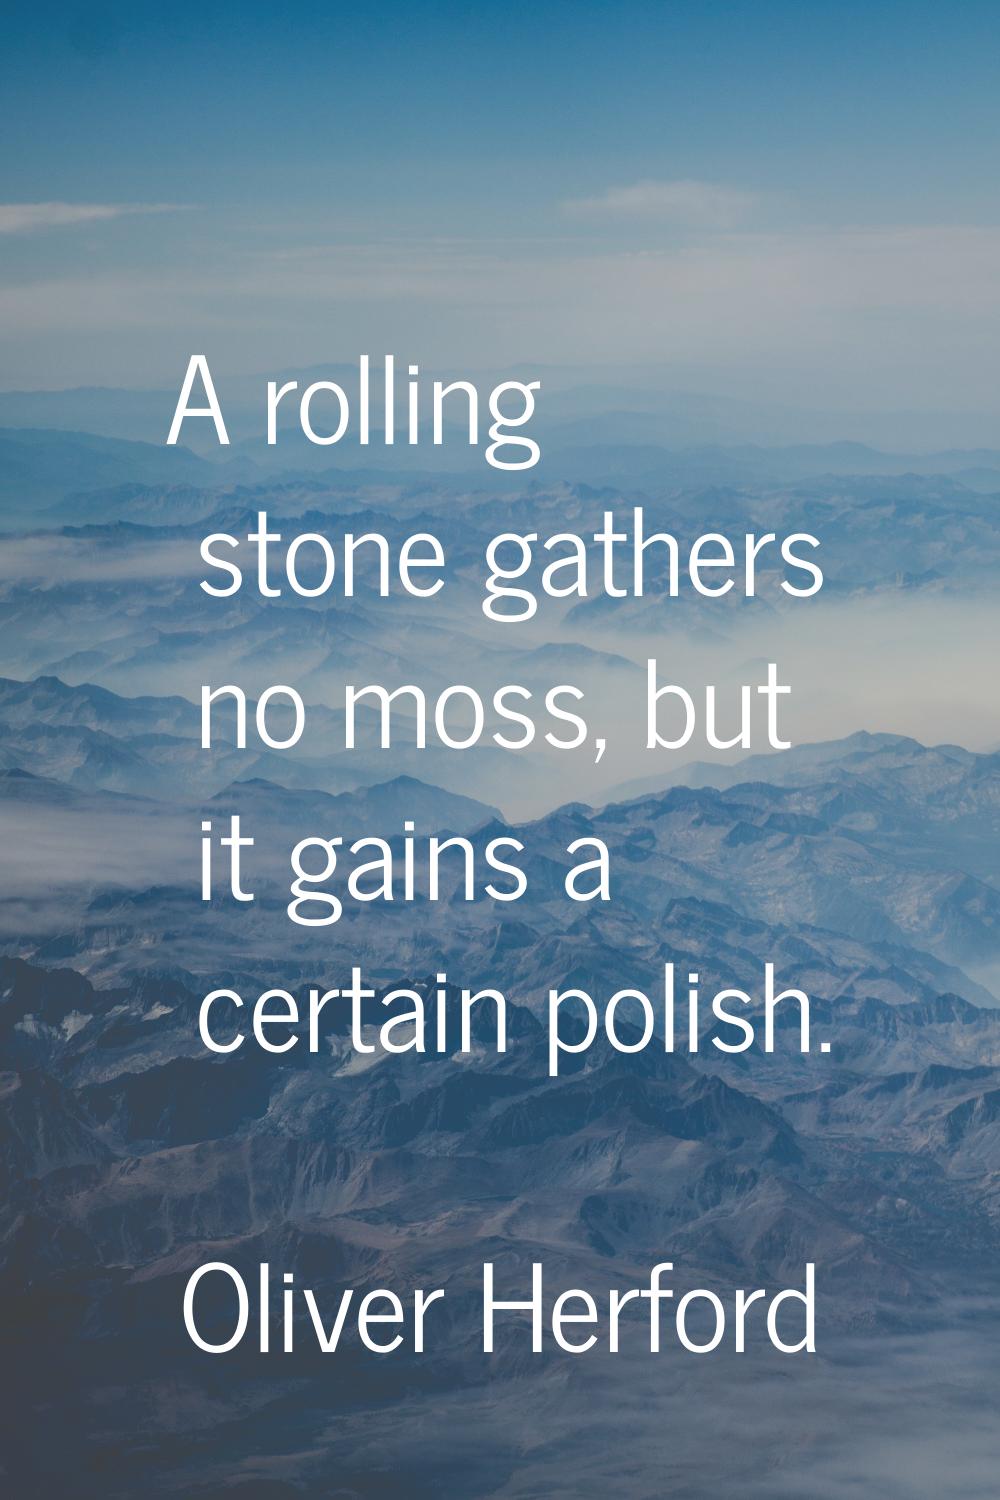 A rolling stone gathers no moss, but it gains a certain polish.